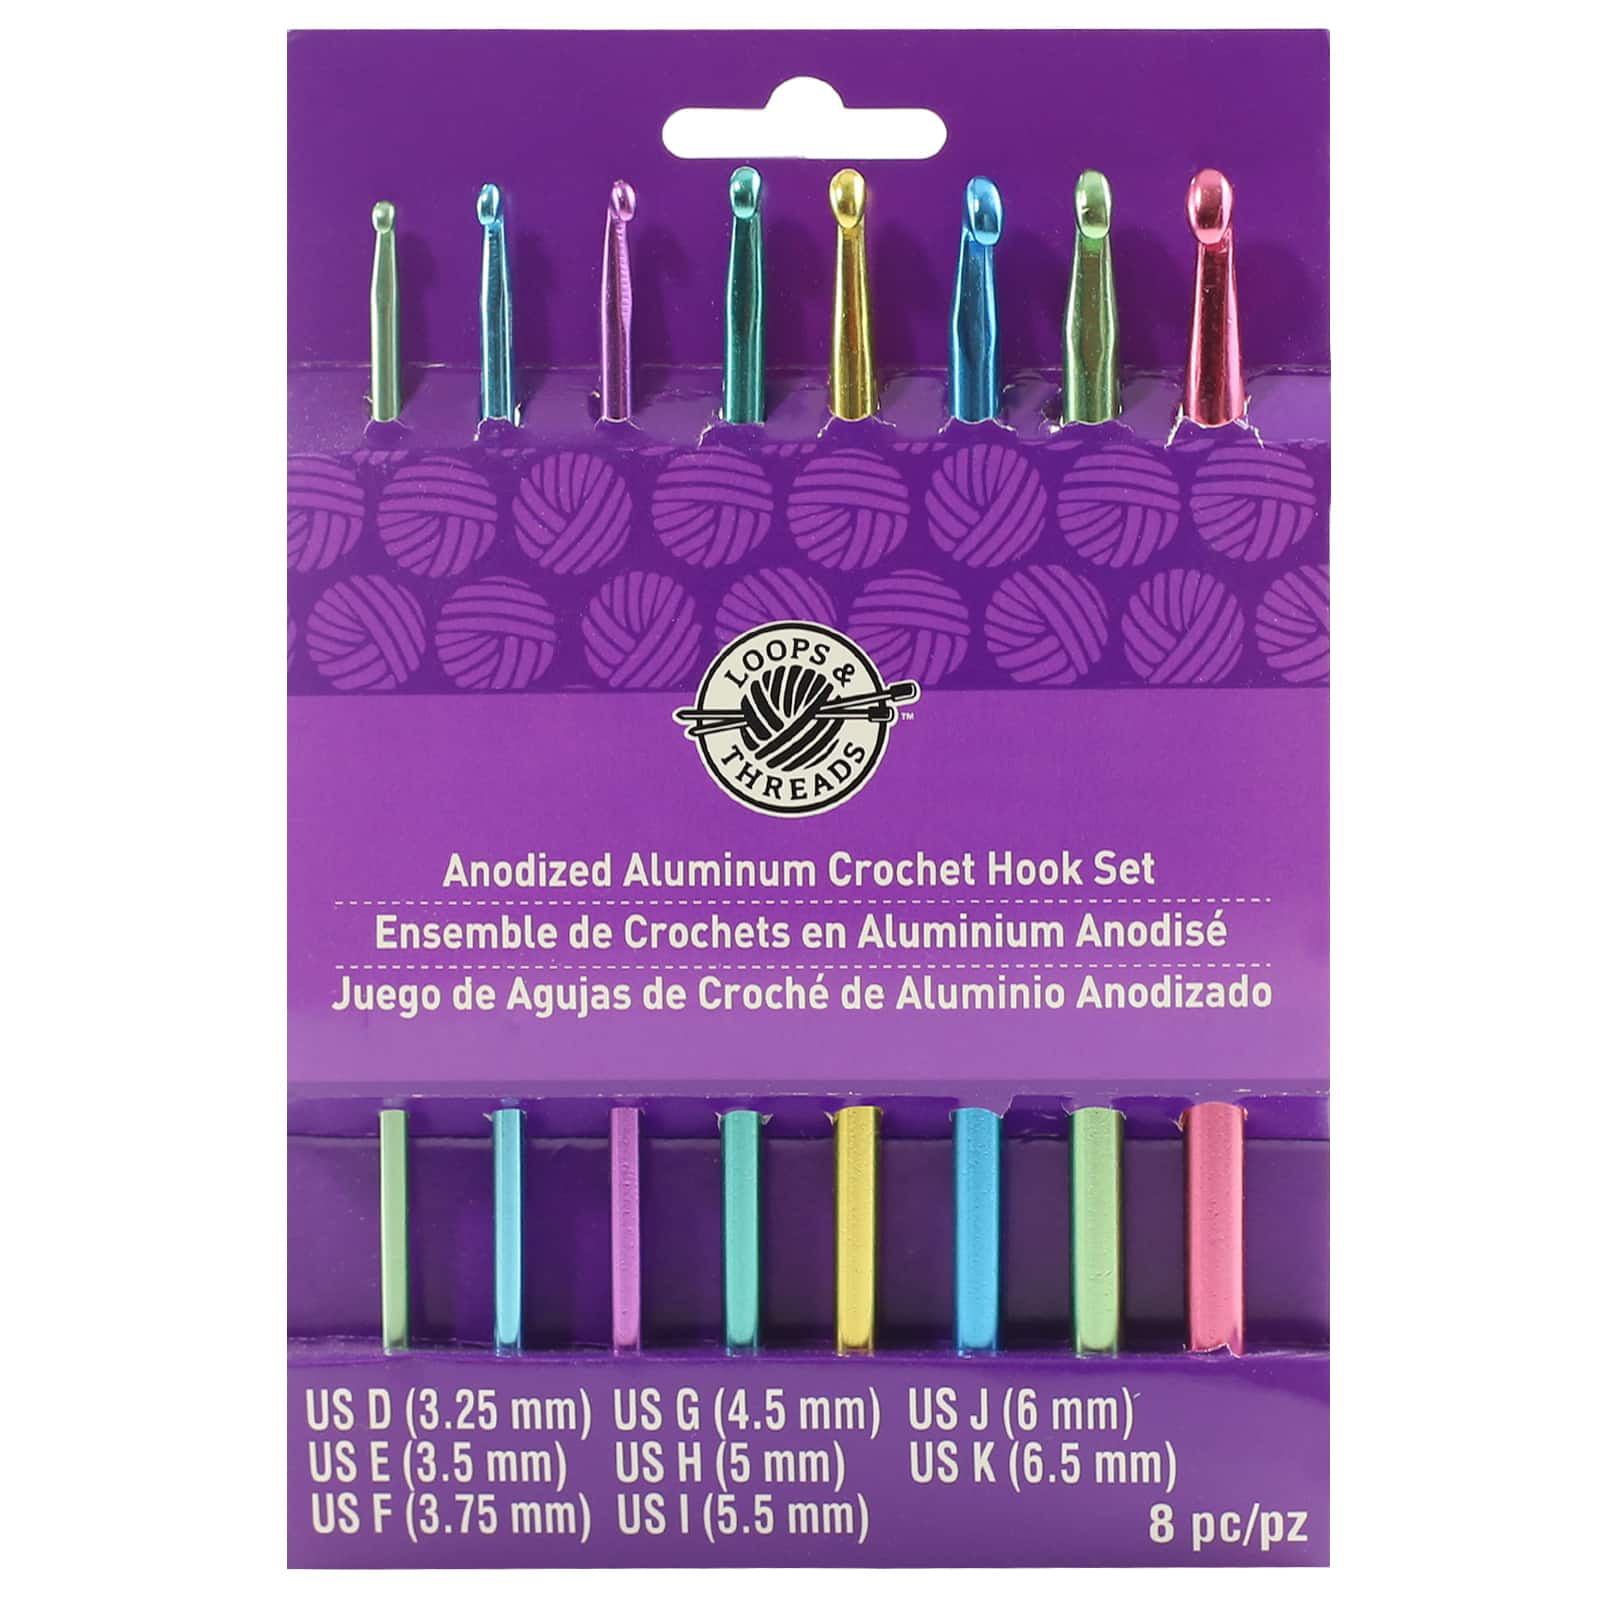 Flash Sale 🔔 Anodized Aluminum Crochet Hook Set by Loops & Threads®, G-I  😀